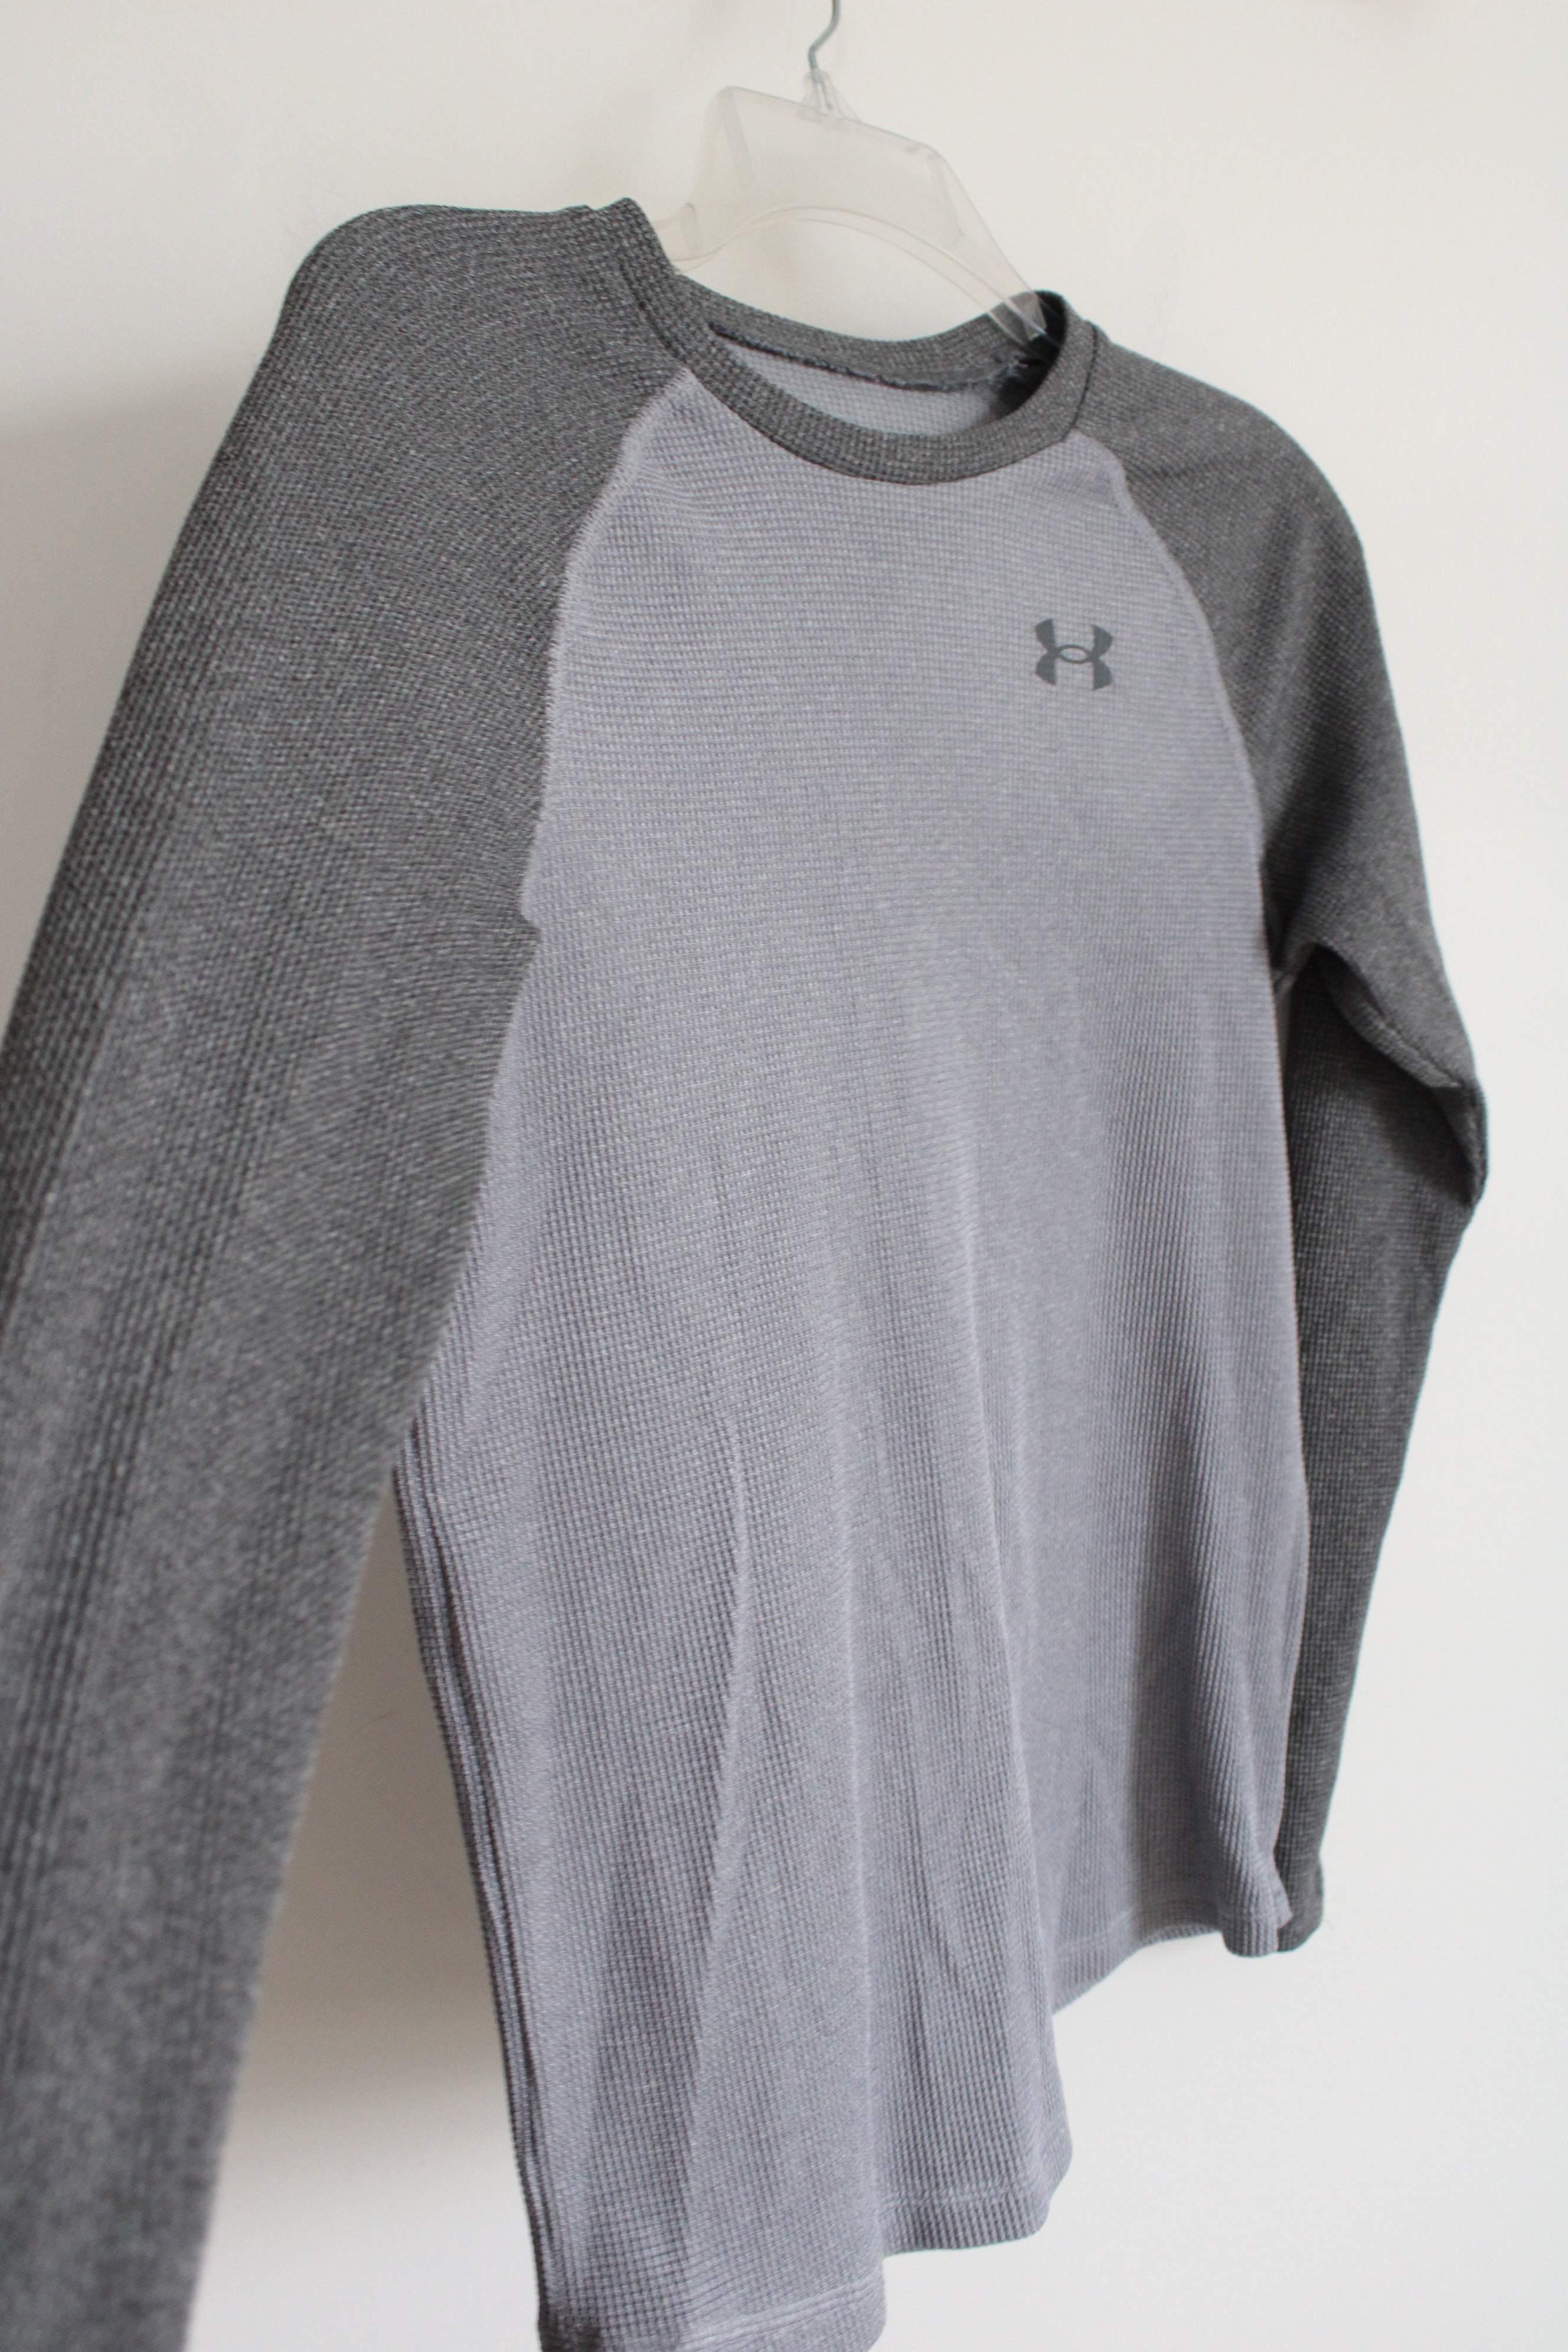 Under Armour Loose Fit Gray Waffle Knit Long Sleeved Shirt | Youth L (14/16)